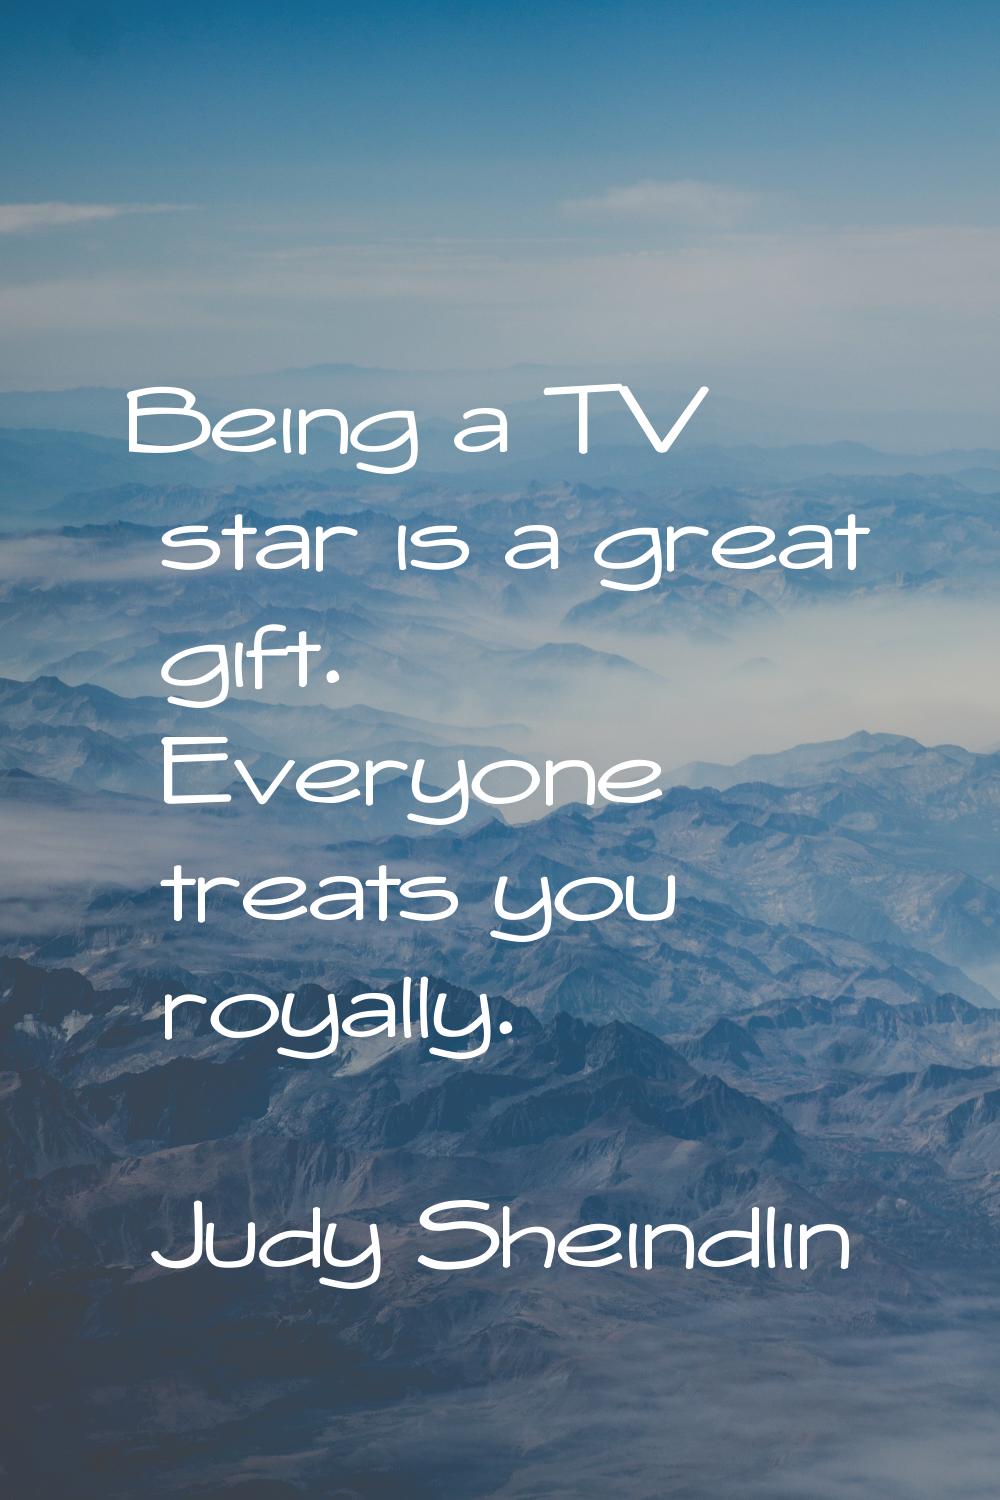 Being a TV star is a great gift. Everyone treats you royally.